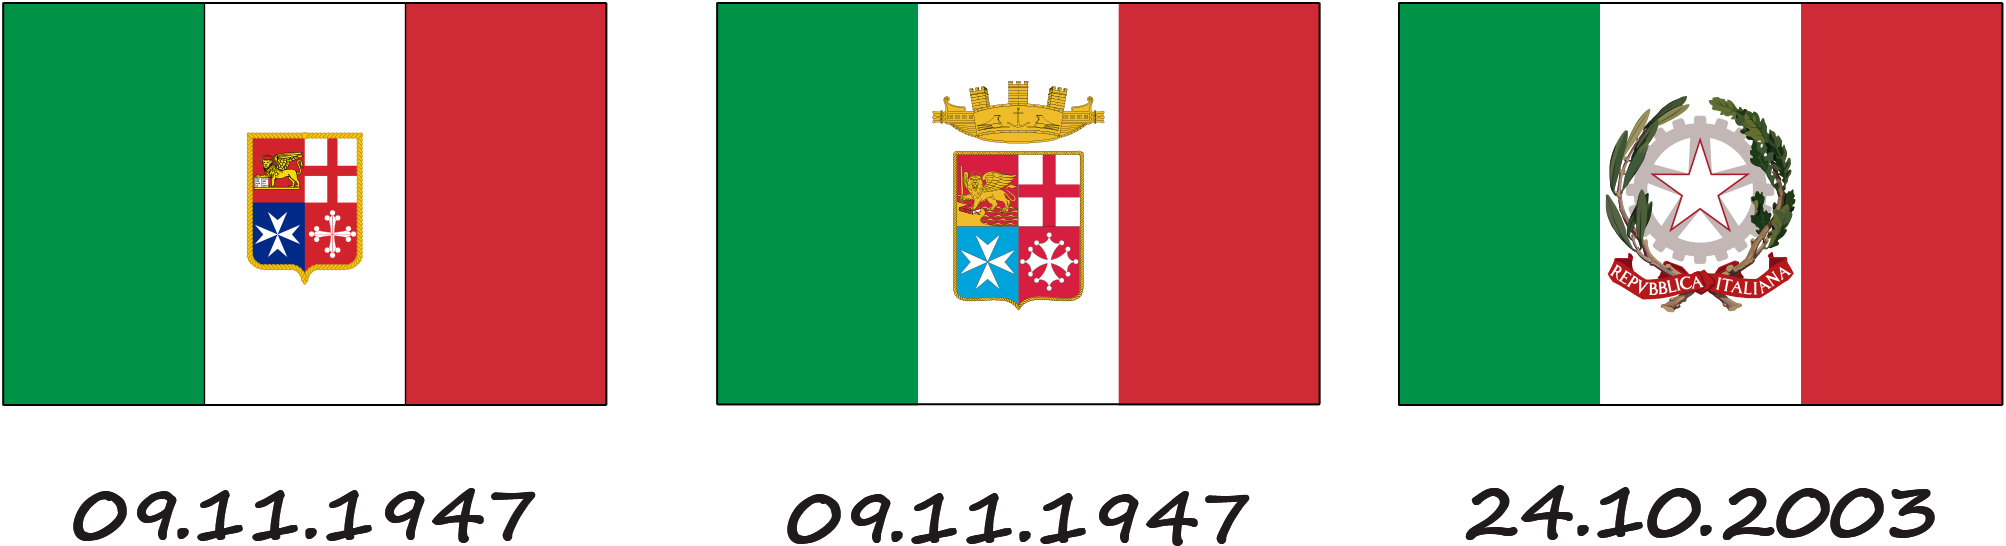 All flags of Italy